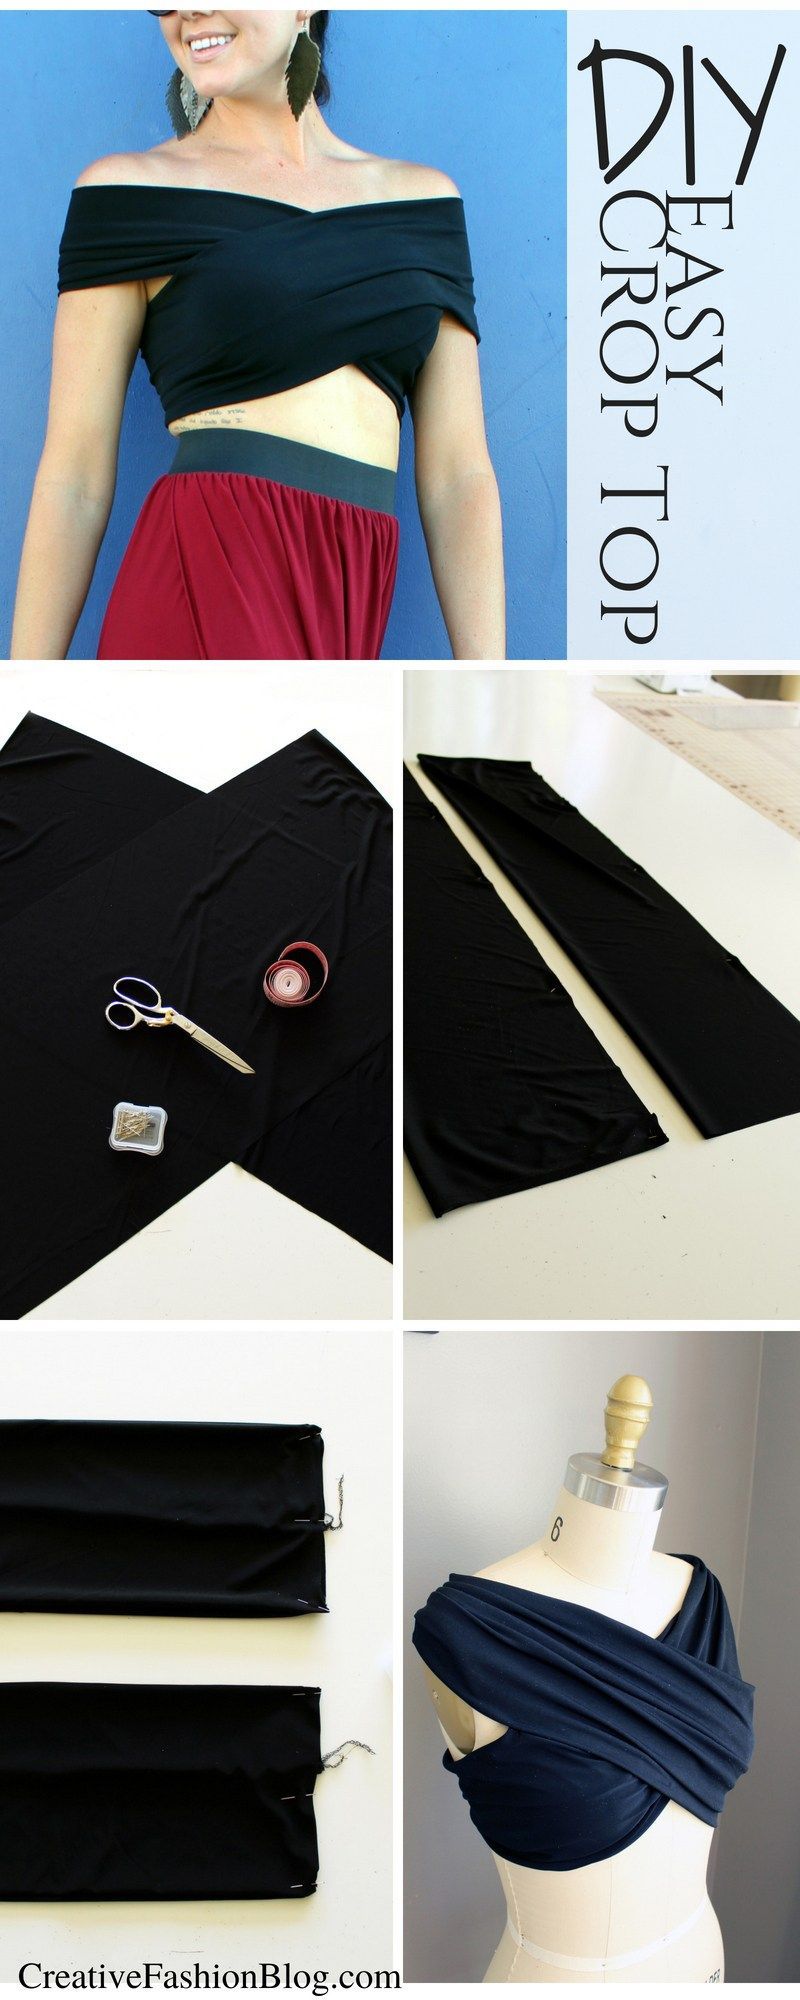 How To Sew An Easy Summer DIY Crop Top - Creative Fashion Blog - How To Sew An Easy Summer DIY Crop Top - Creative Fashion Blog -   15 diy Clothes no sewing ideas